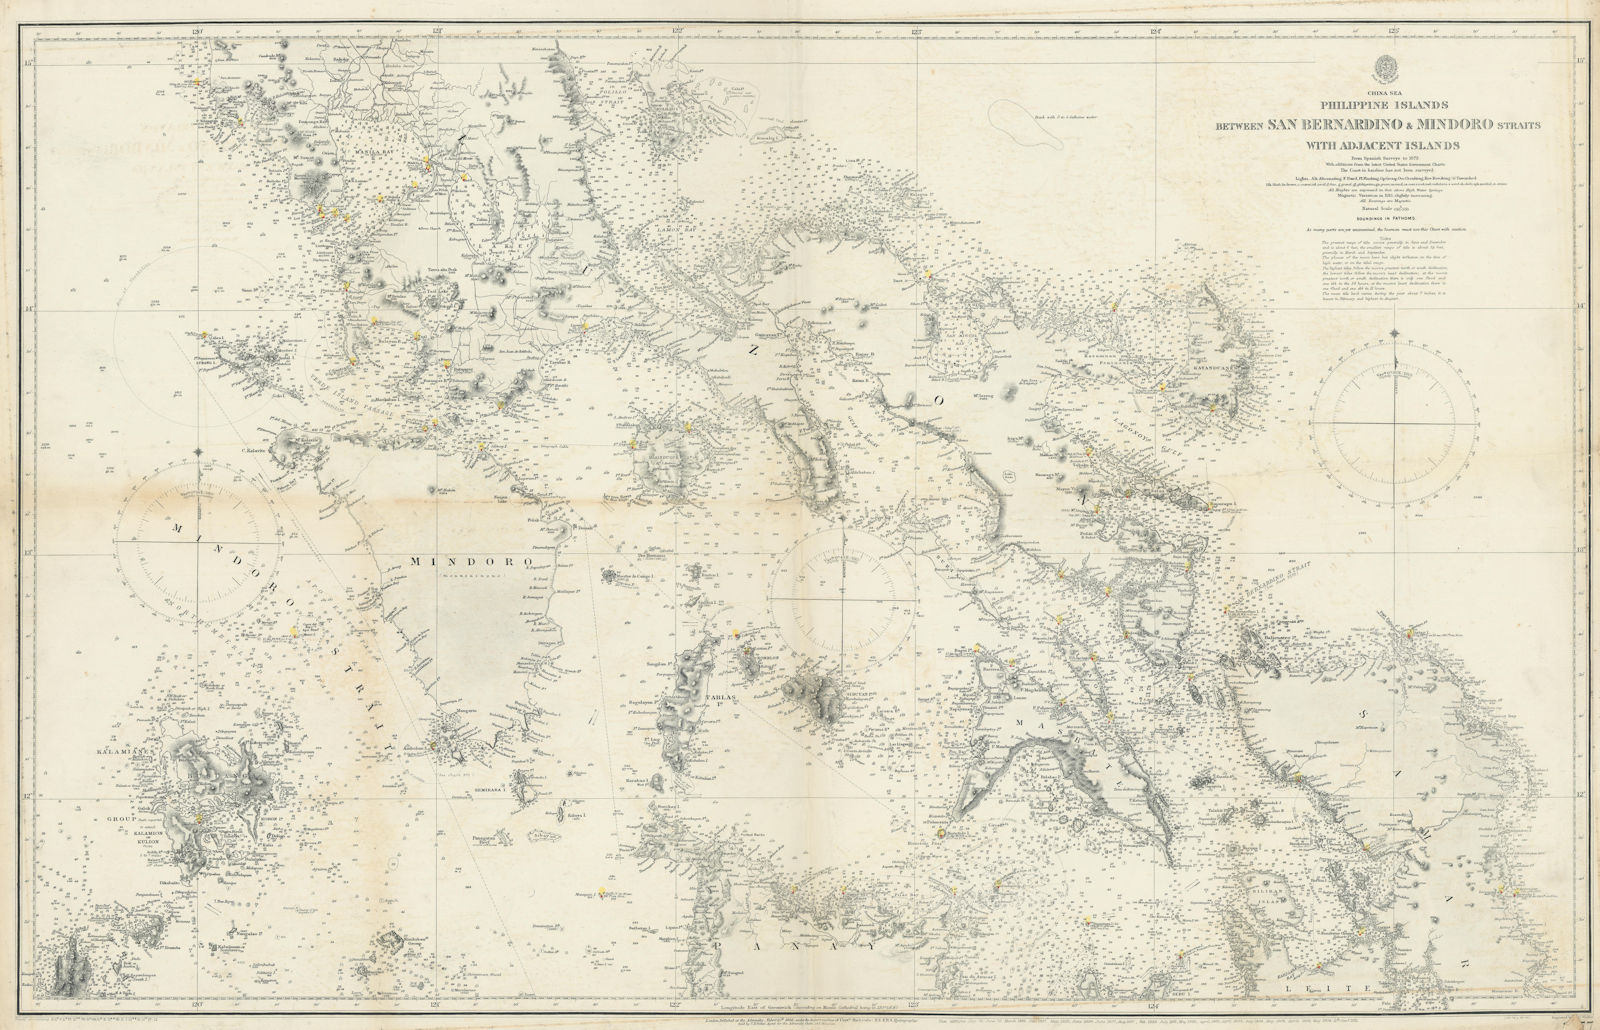 Philippines. Southern Luzon Mindoro Visayas. ADMIRALTY sea chart 1866 (1912) map